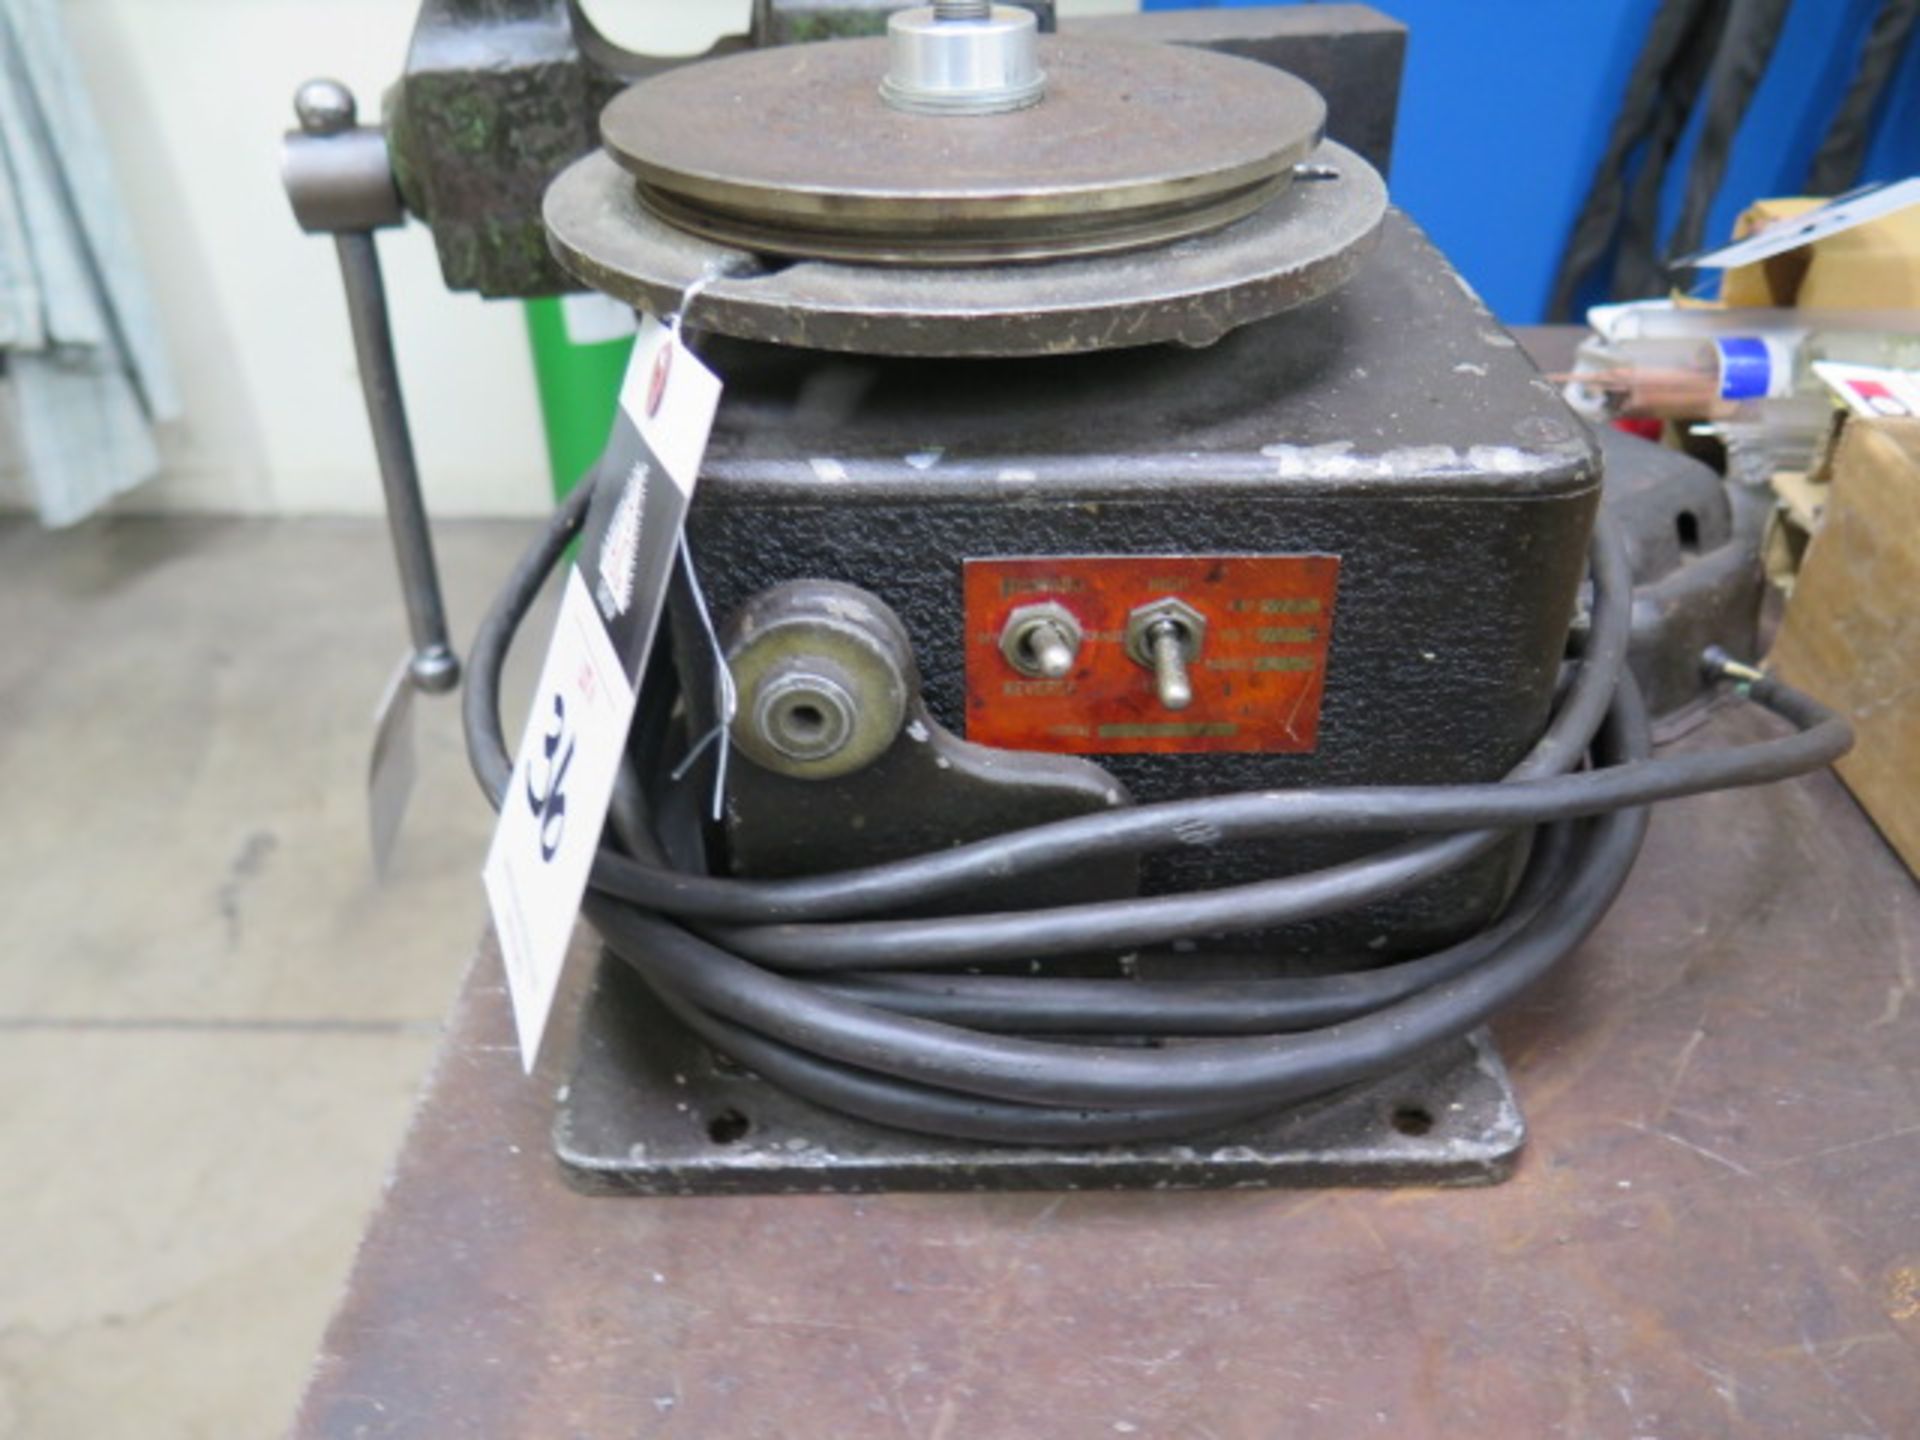 MK Aircrafter Welding Positioner (SOLD AS-IS - NO WARRANTY) - Image 2 of 6